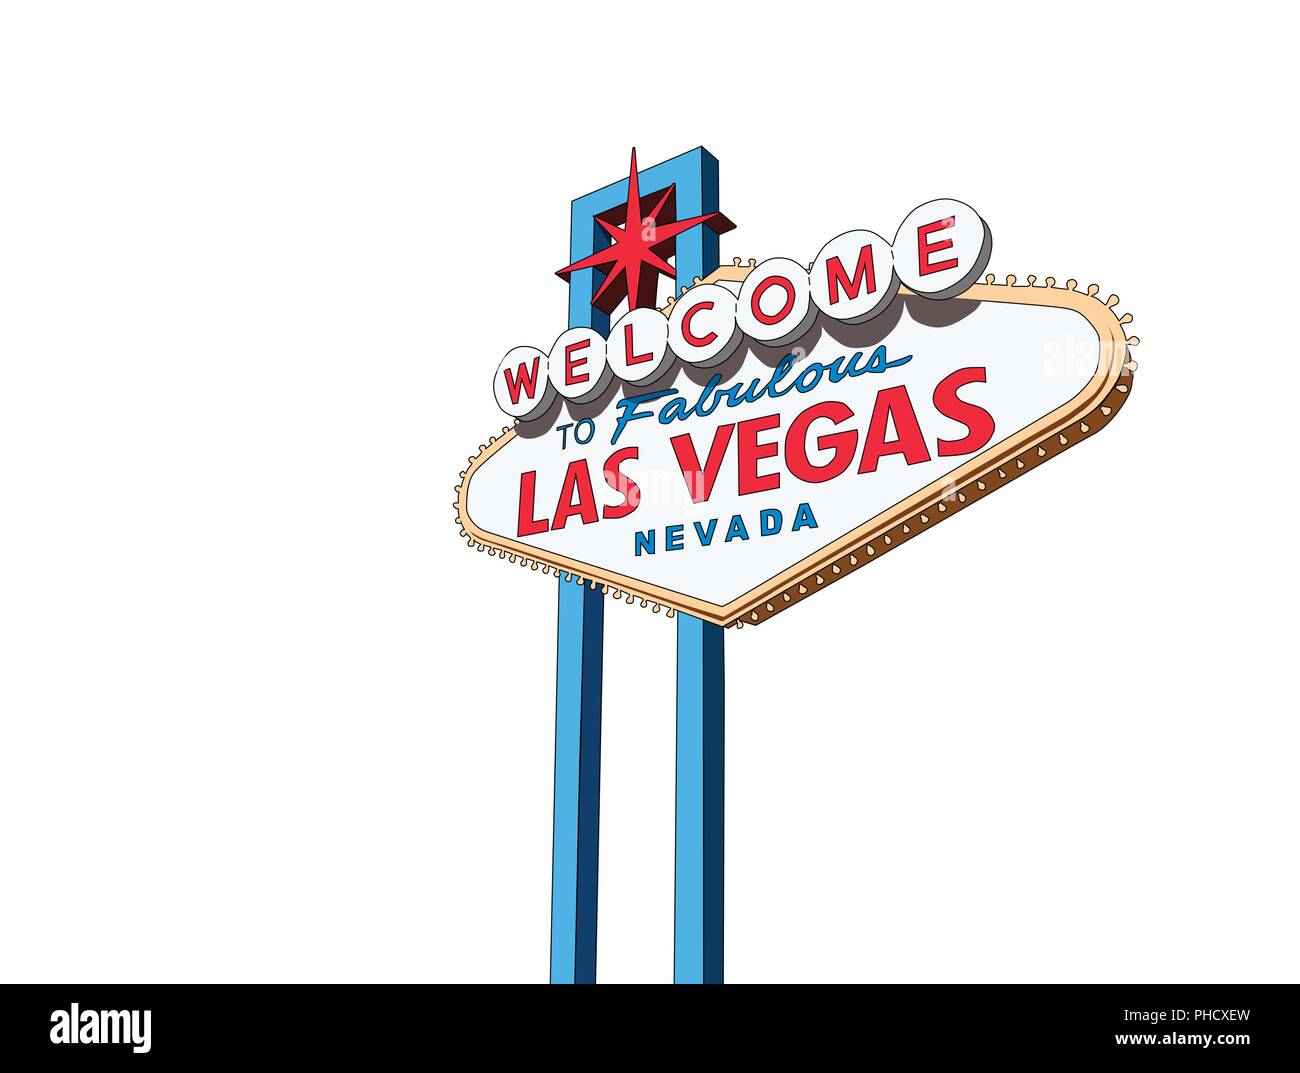 Welcome to Las Vegas Nevada sign vector illustration isolation. Stock Vector